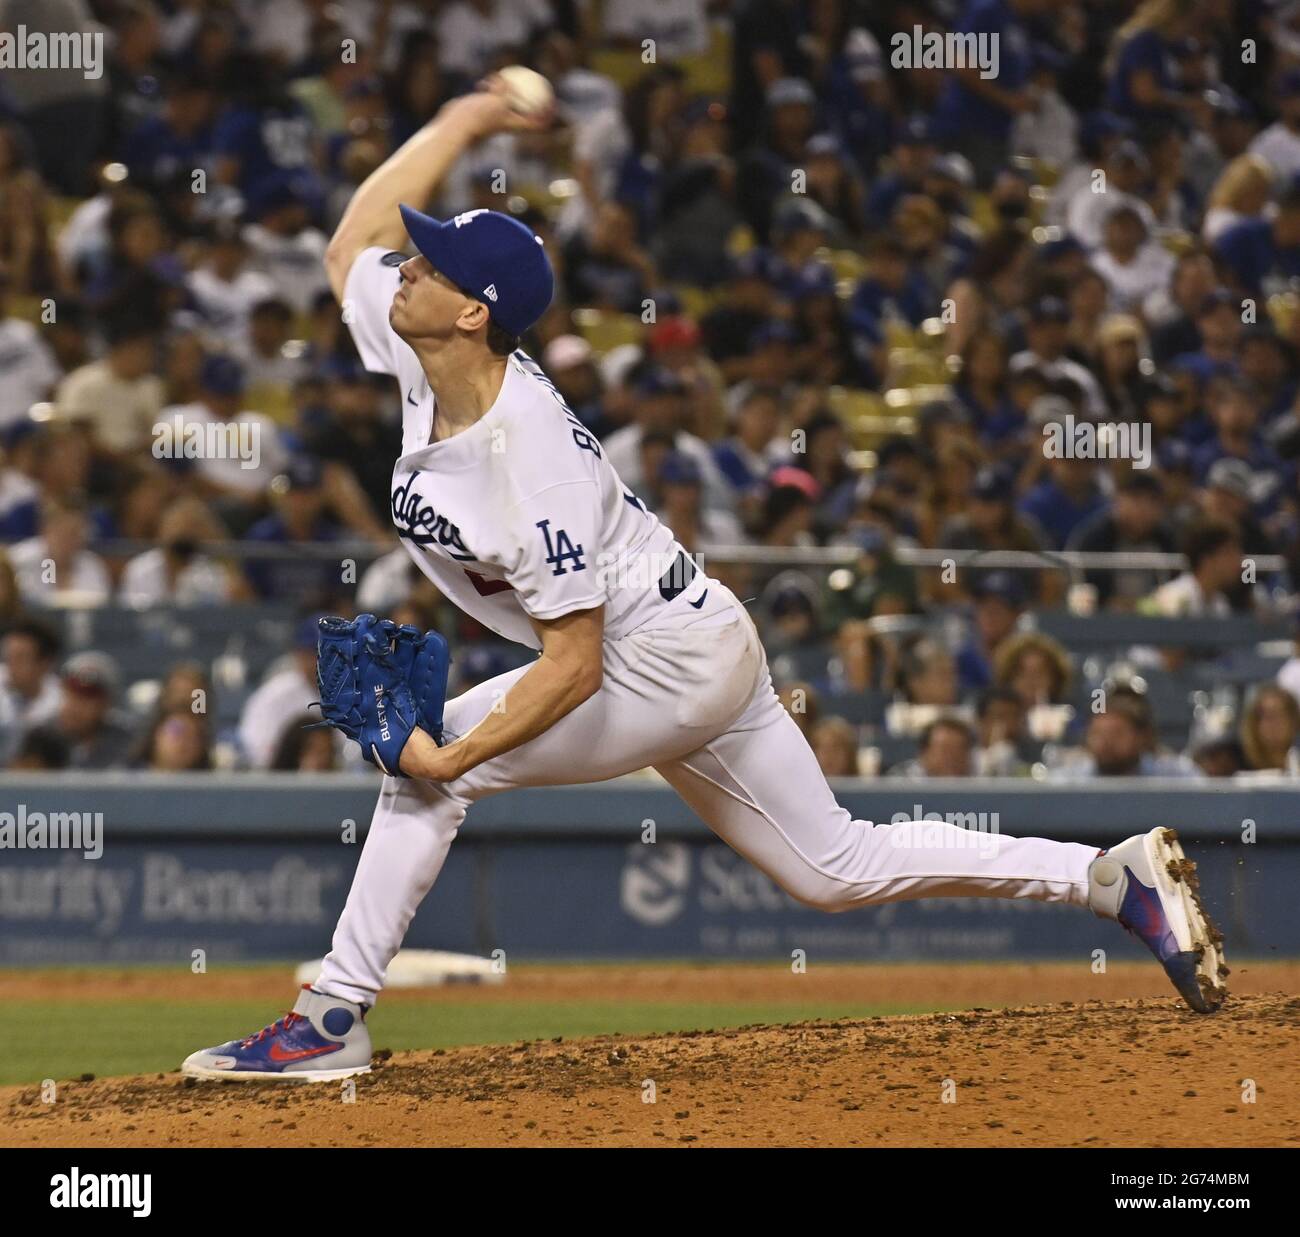 Los Angeles, United States. 11th July, 2021. Los Angeles Dodgers' starting pitcher Walker Buehler winds up to deliver against the Arizona Diamondbacks during the sixth inning at Dodger Stadium in Los Angeles on Saturday, July 10, 2021. Butler, who was named to the NL All-Star team earlier in the day, pitched six scoreless innings. The Dodgers routed the Diamondbacks 22-1 Photo by Jim Ruymen/UPI Credit: UPI/Alamy Live News Stock Photo